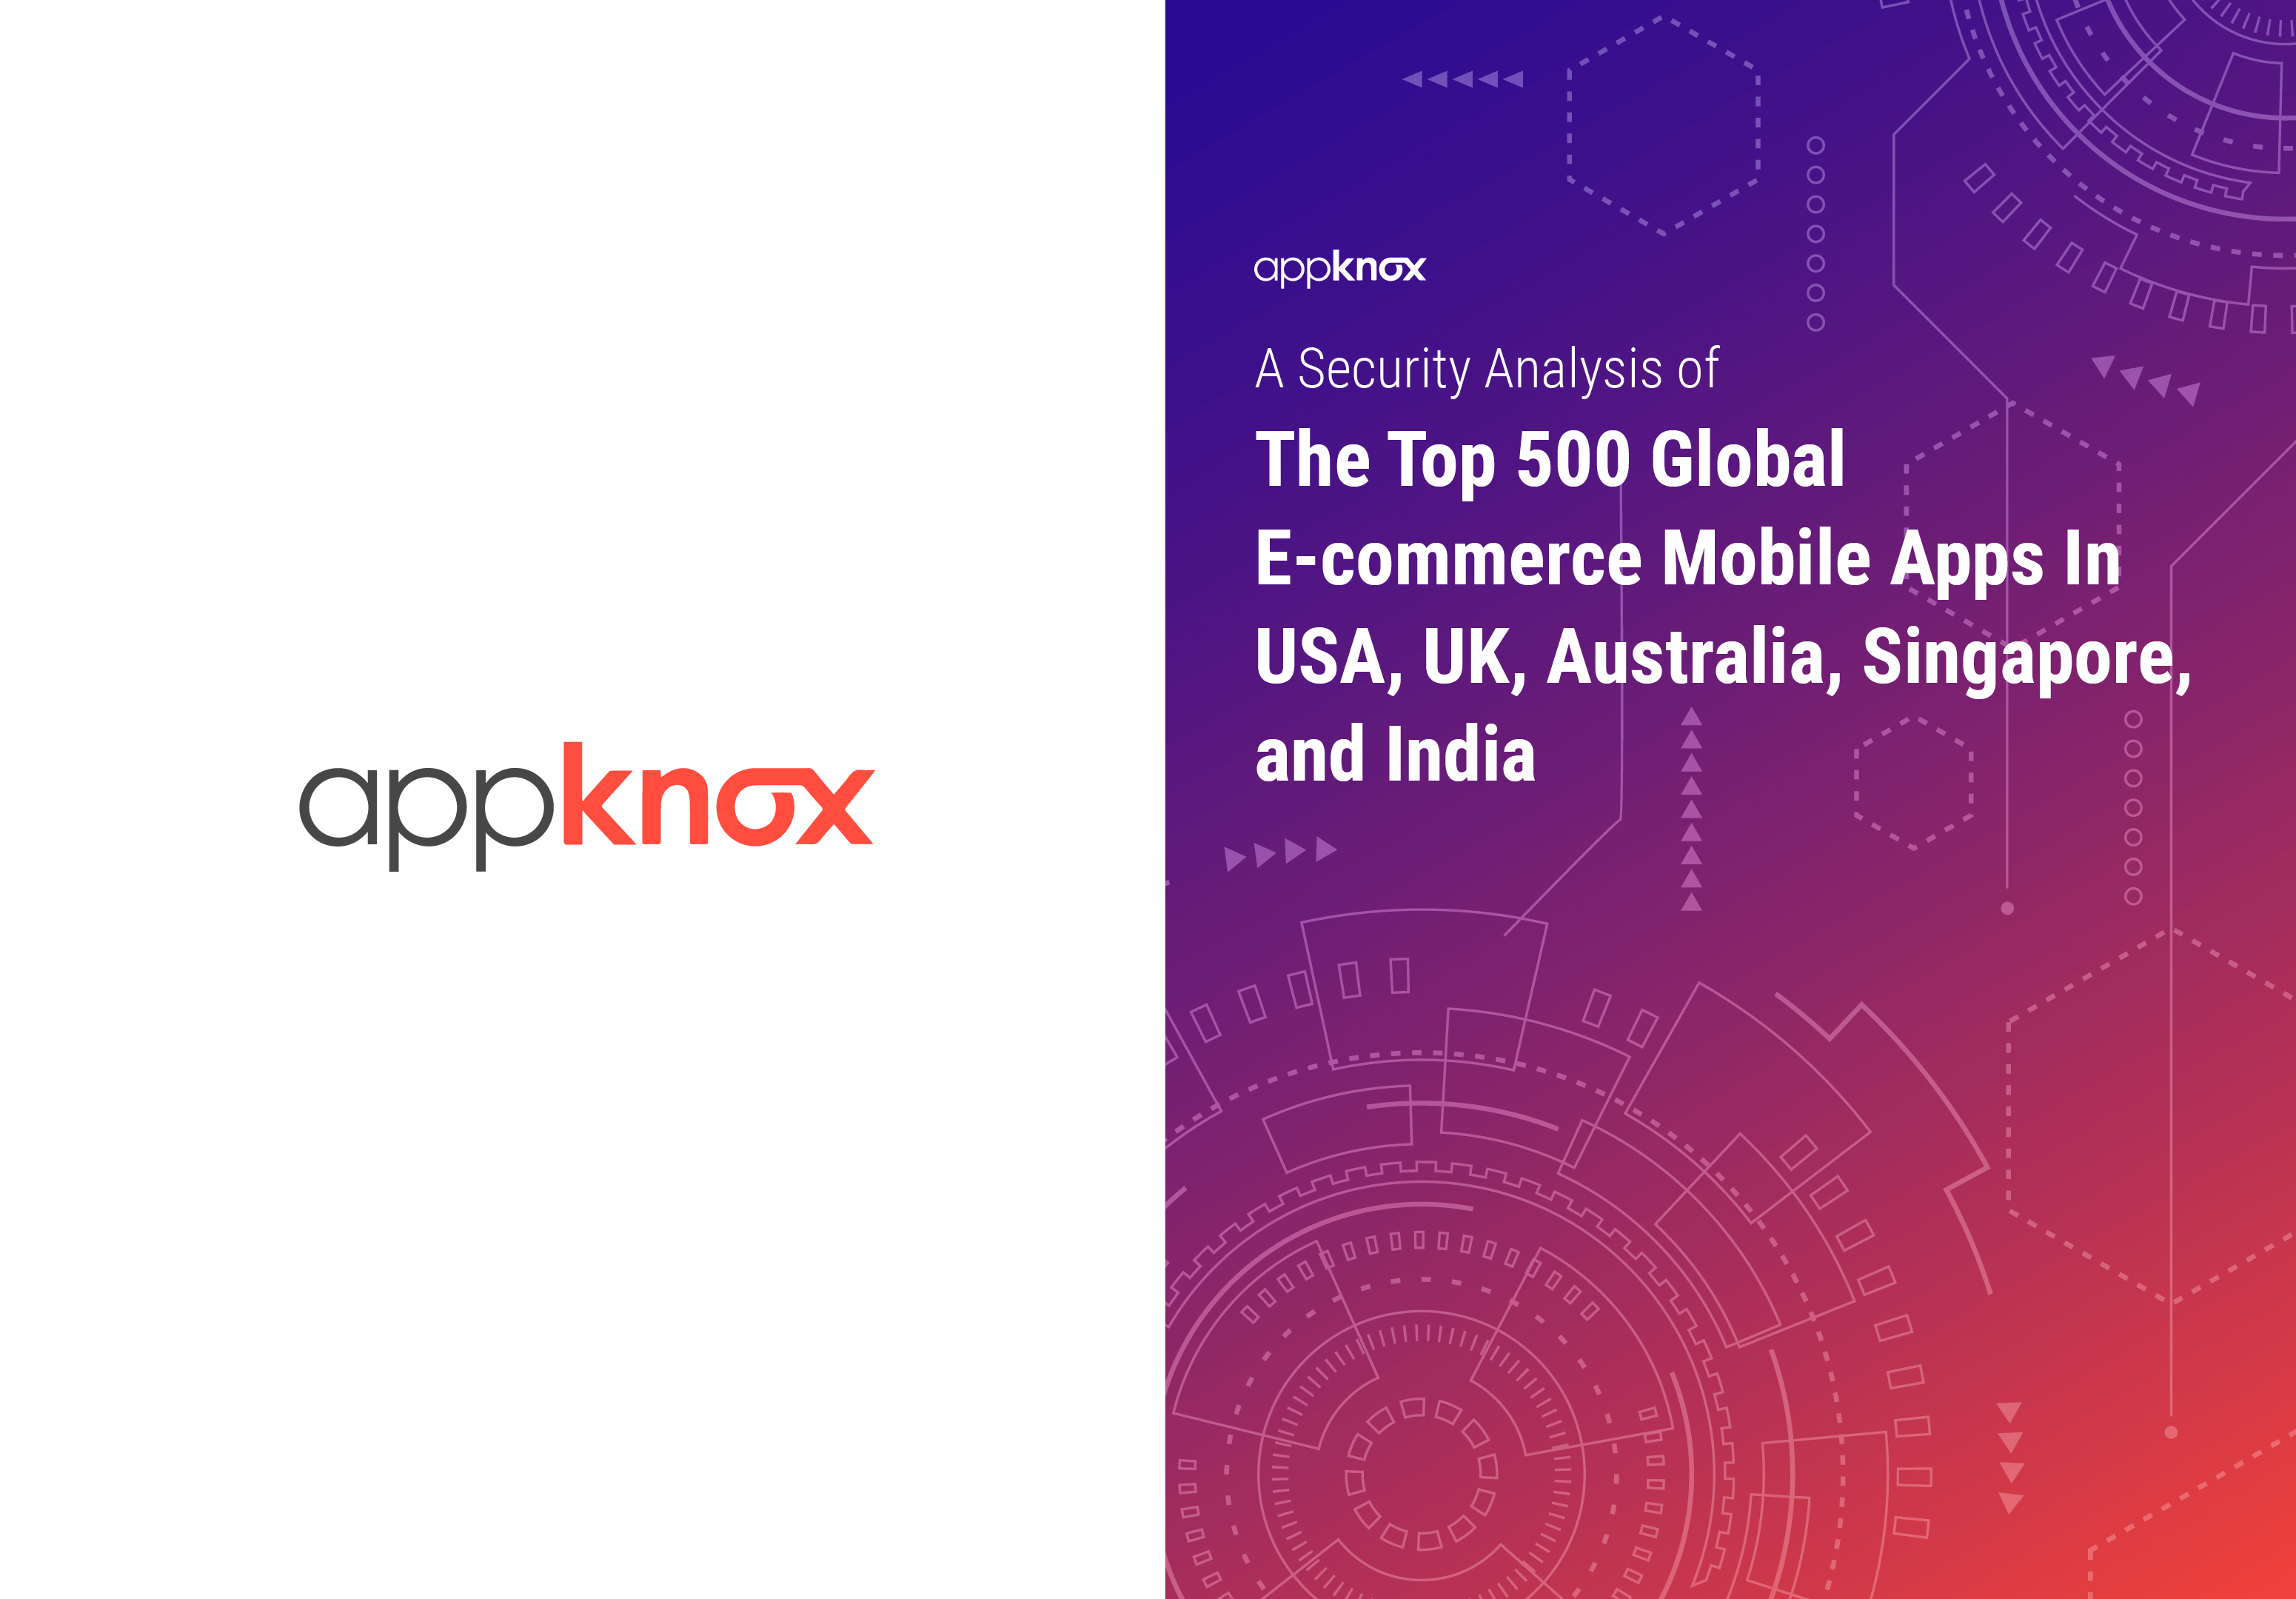 REPORTS - A Security Analysis of The Top 500 Global E-commerce Mobile Apps In USA, UK, Australia, Singapore, and India